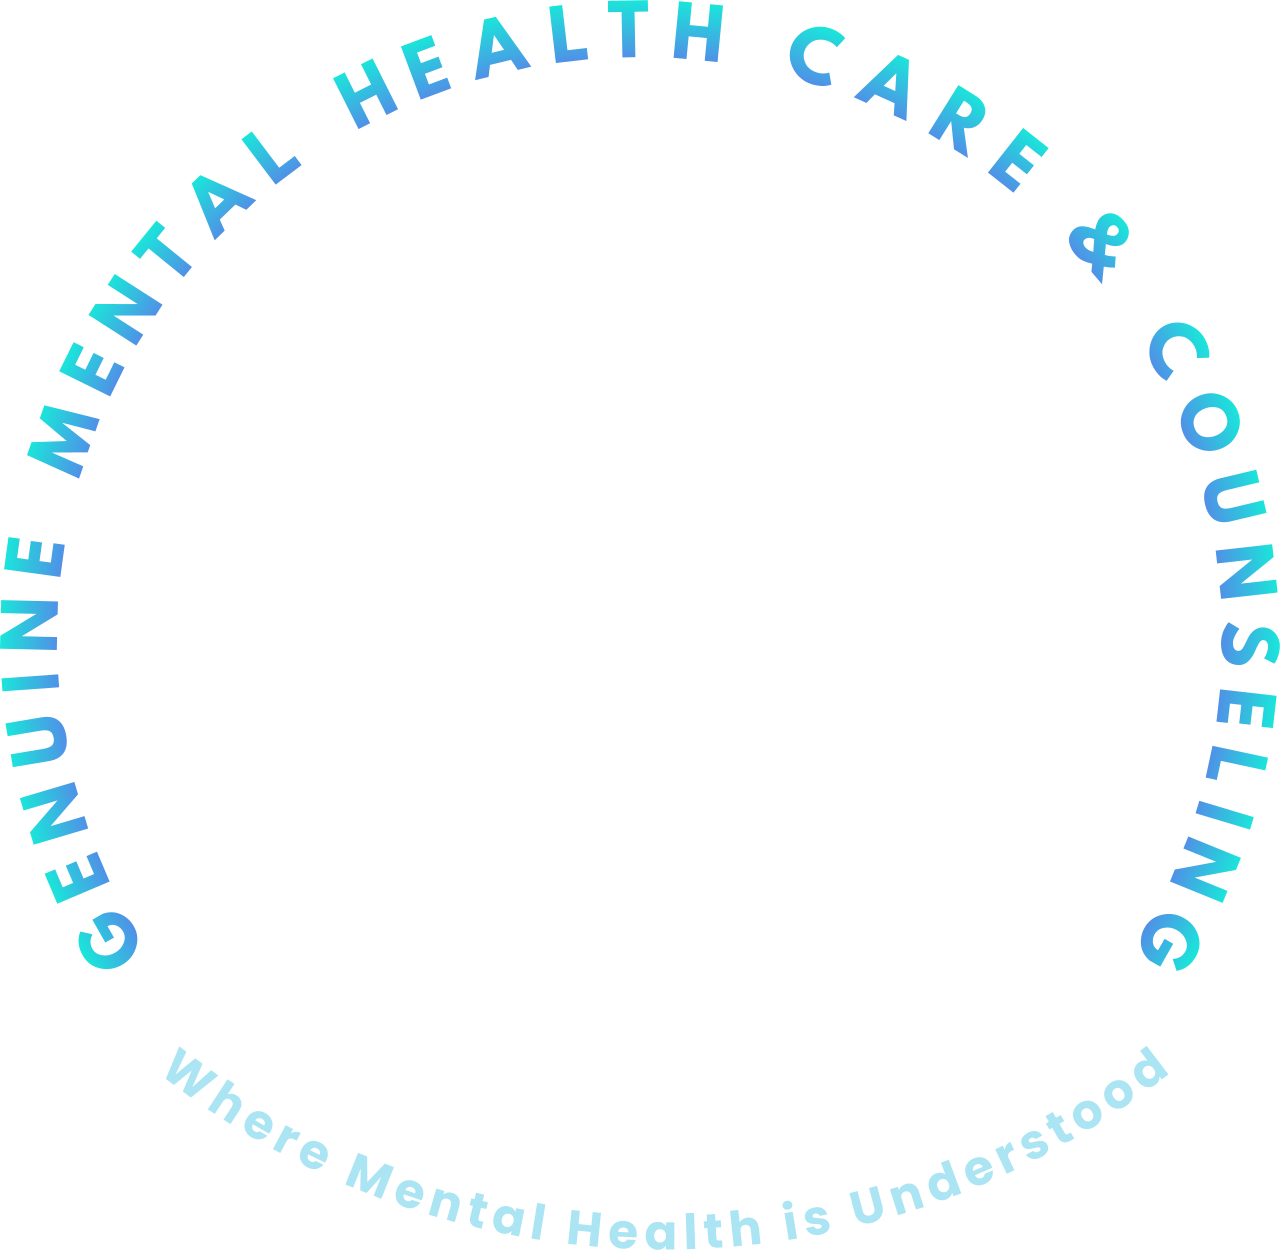 GENUINE MENTAL HEALTH CARE & COUNSELING's logo